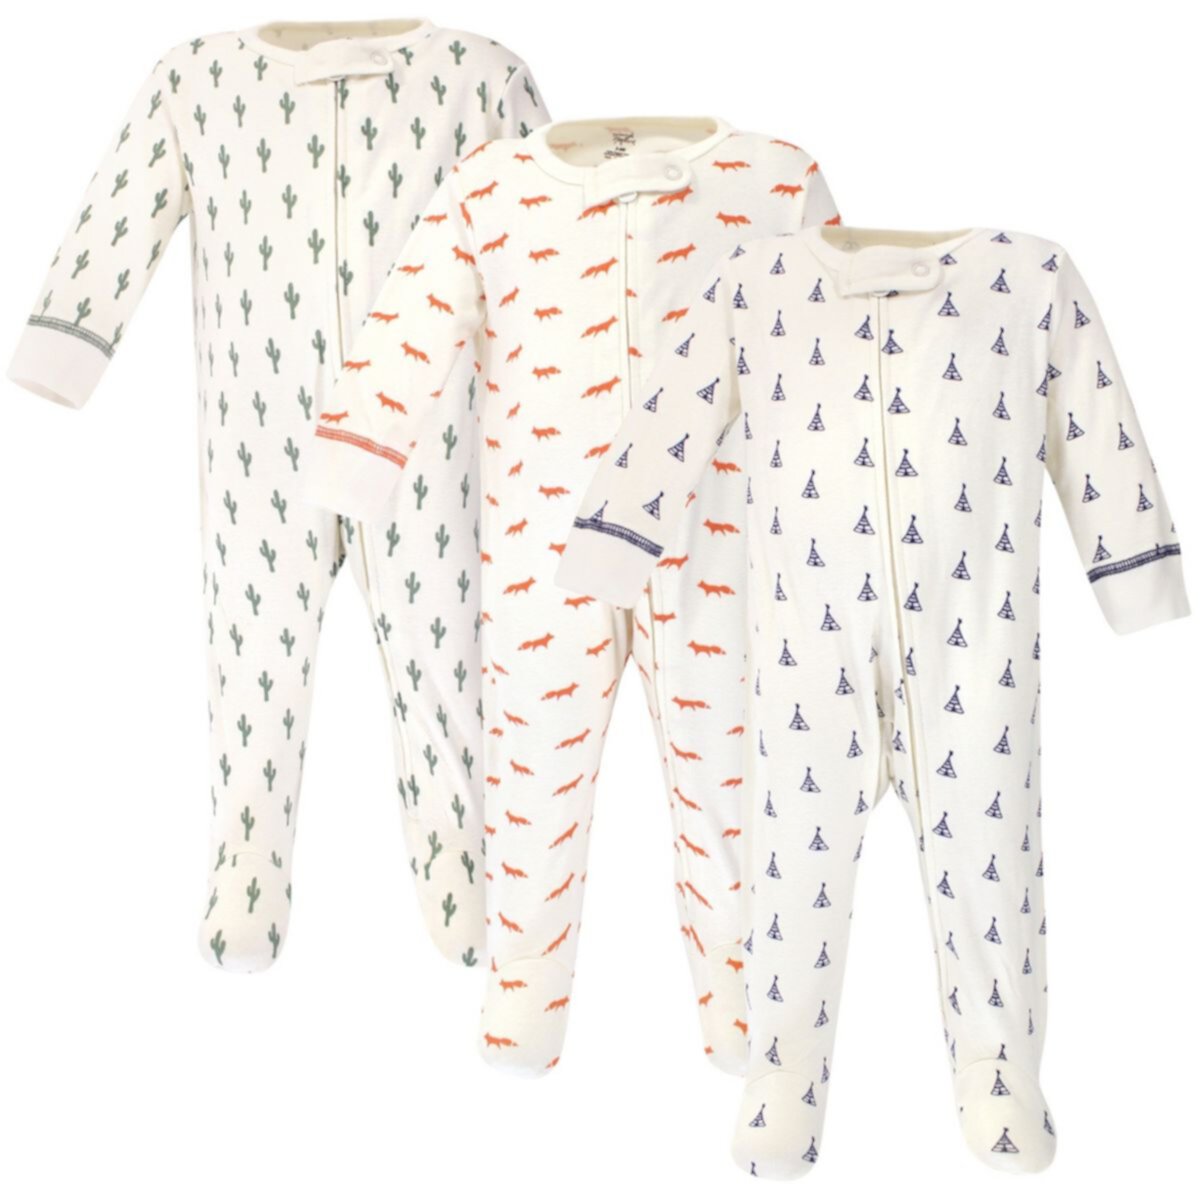 Touched by Nature Baby Organic Cotton Zipper Sleep and Play 3pk, Cactus Touched by Nature